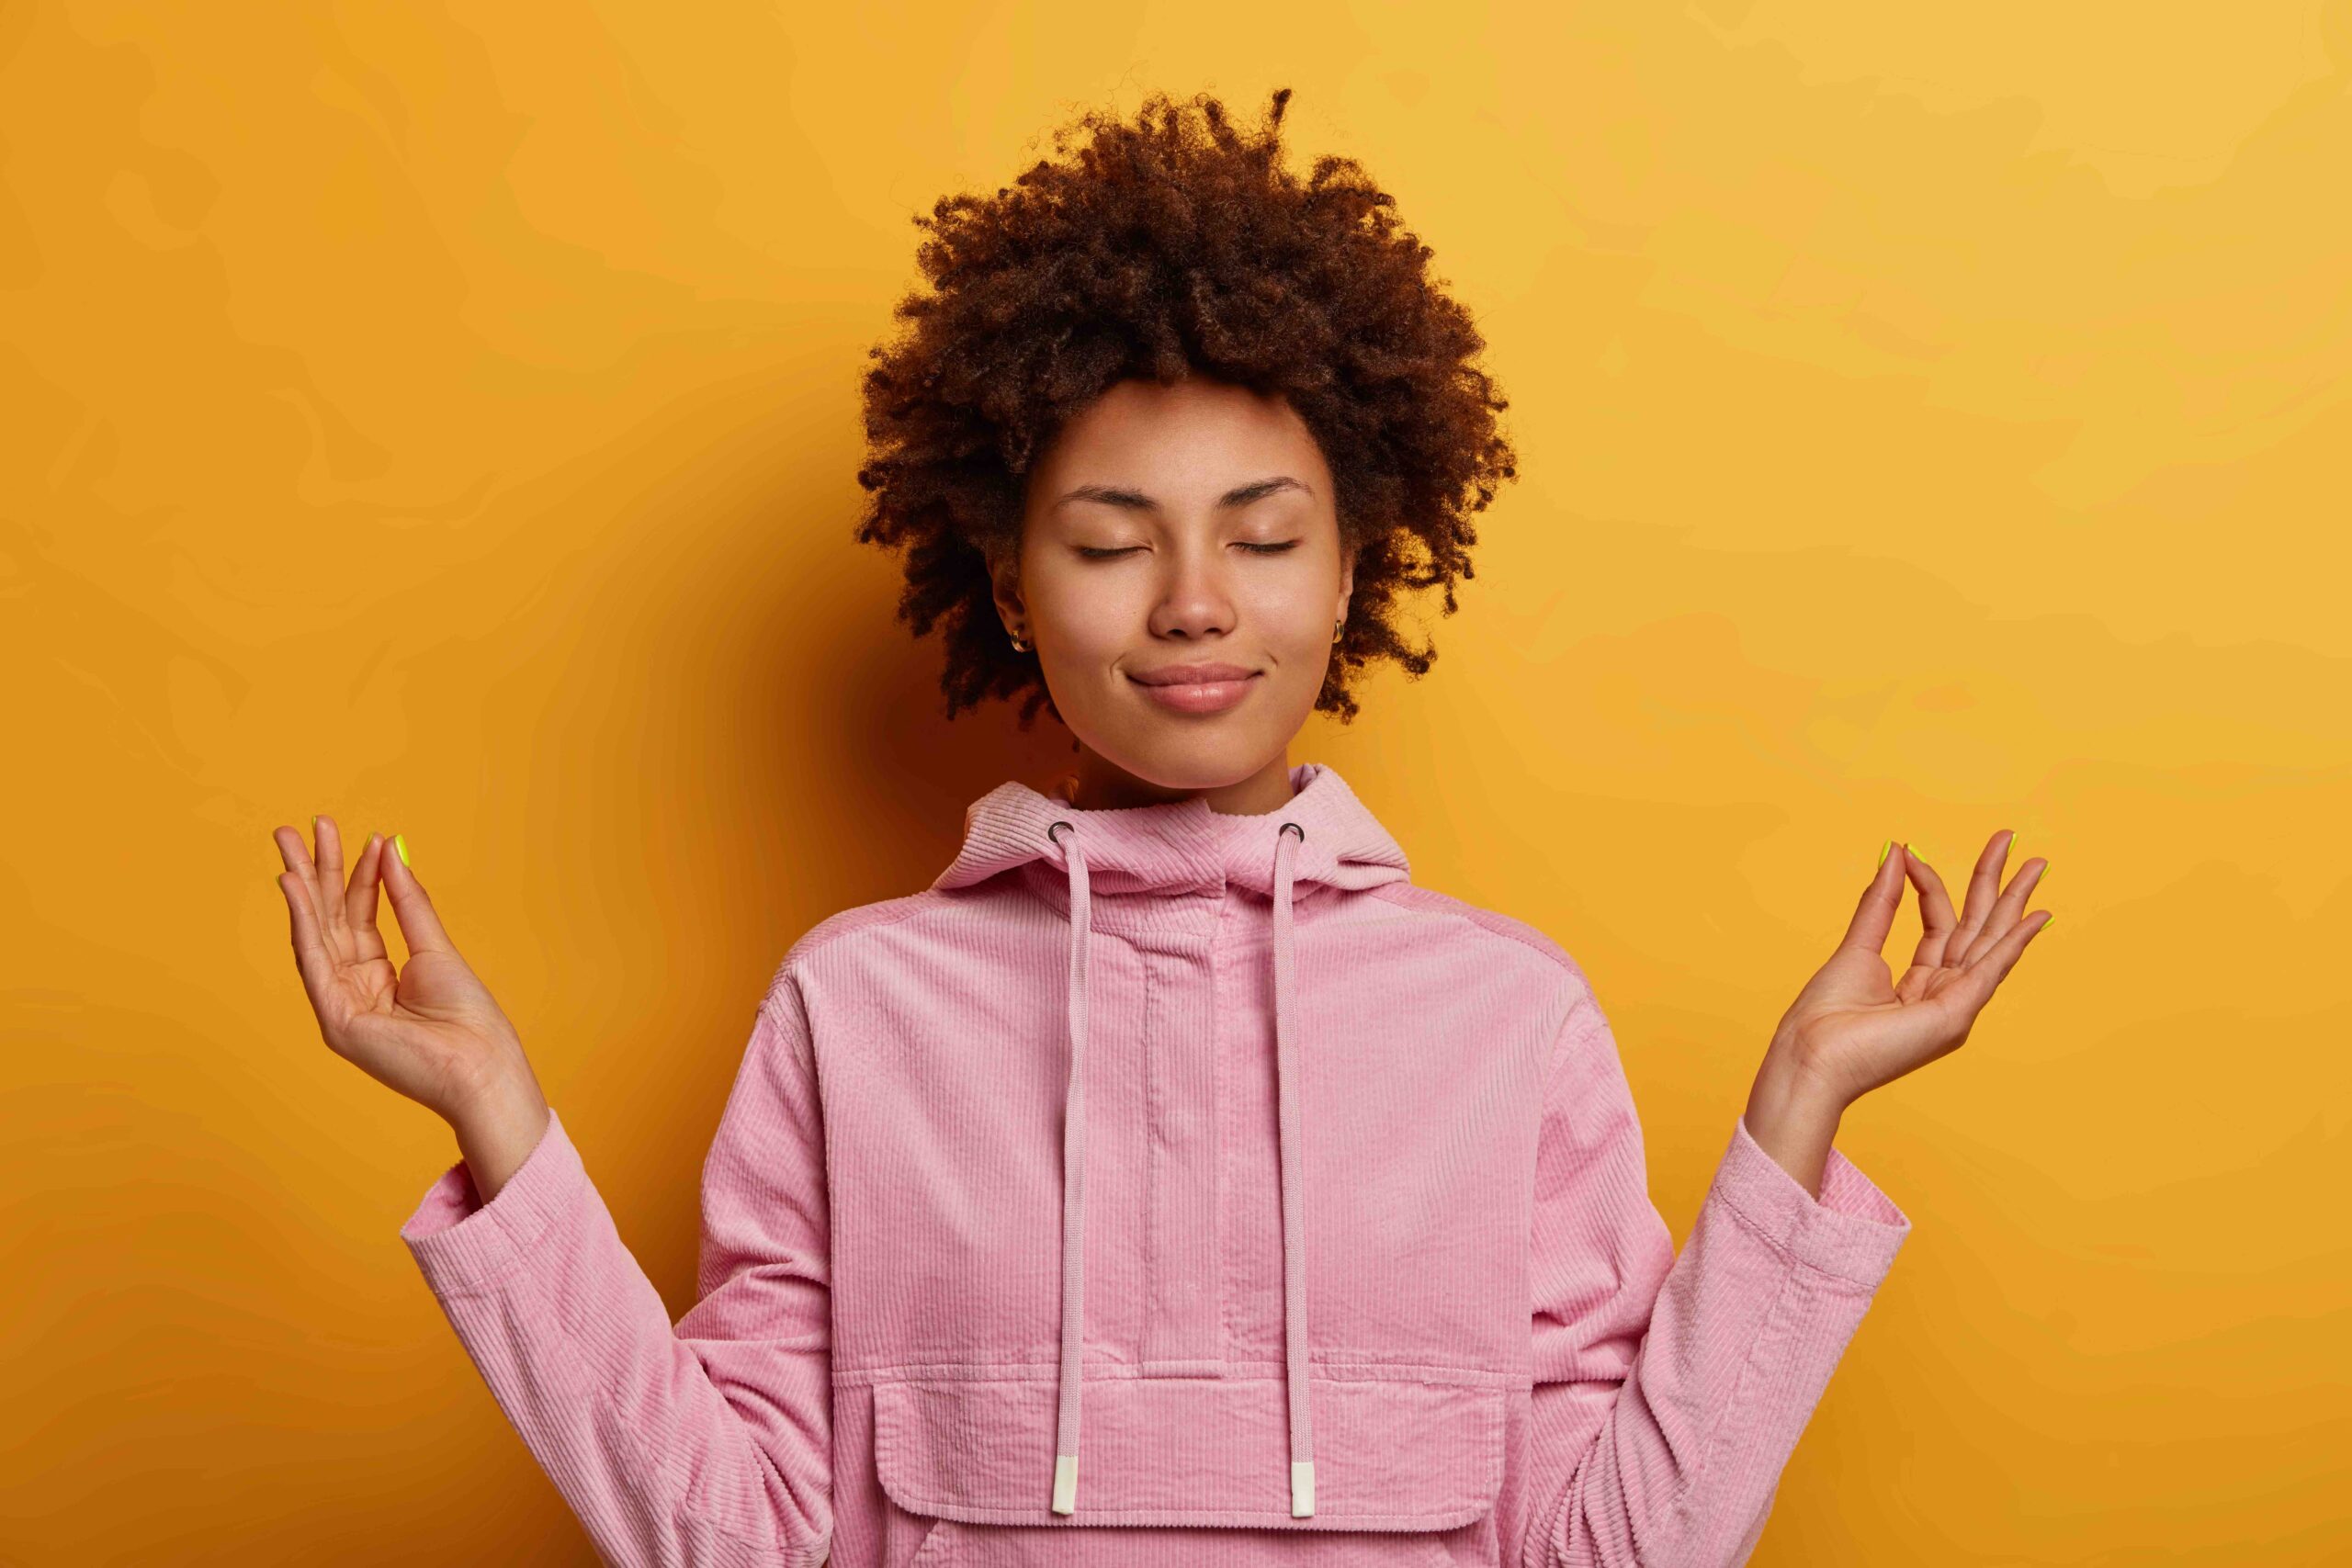 Mental Health. An ethnic woman stands in a lotus pose dressed in a pink sweatshirt on a mustard yellow background.